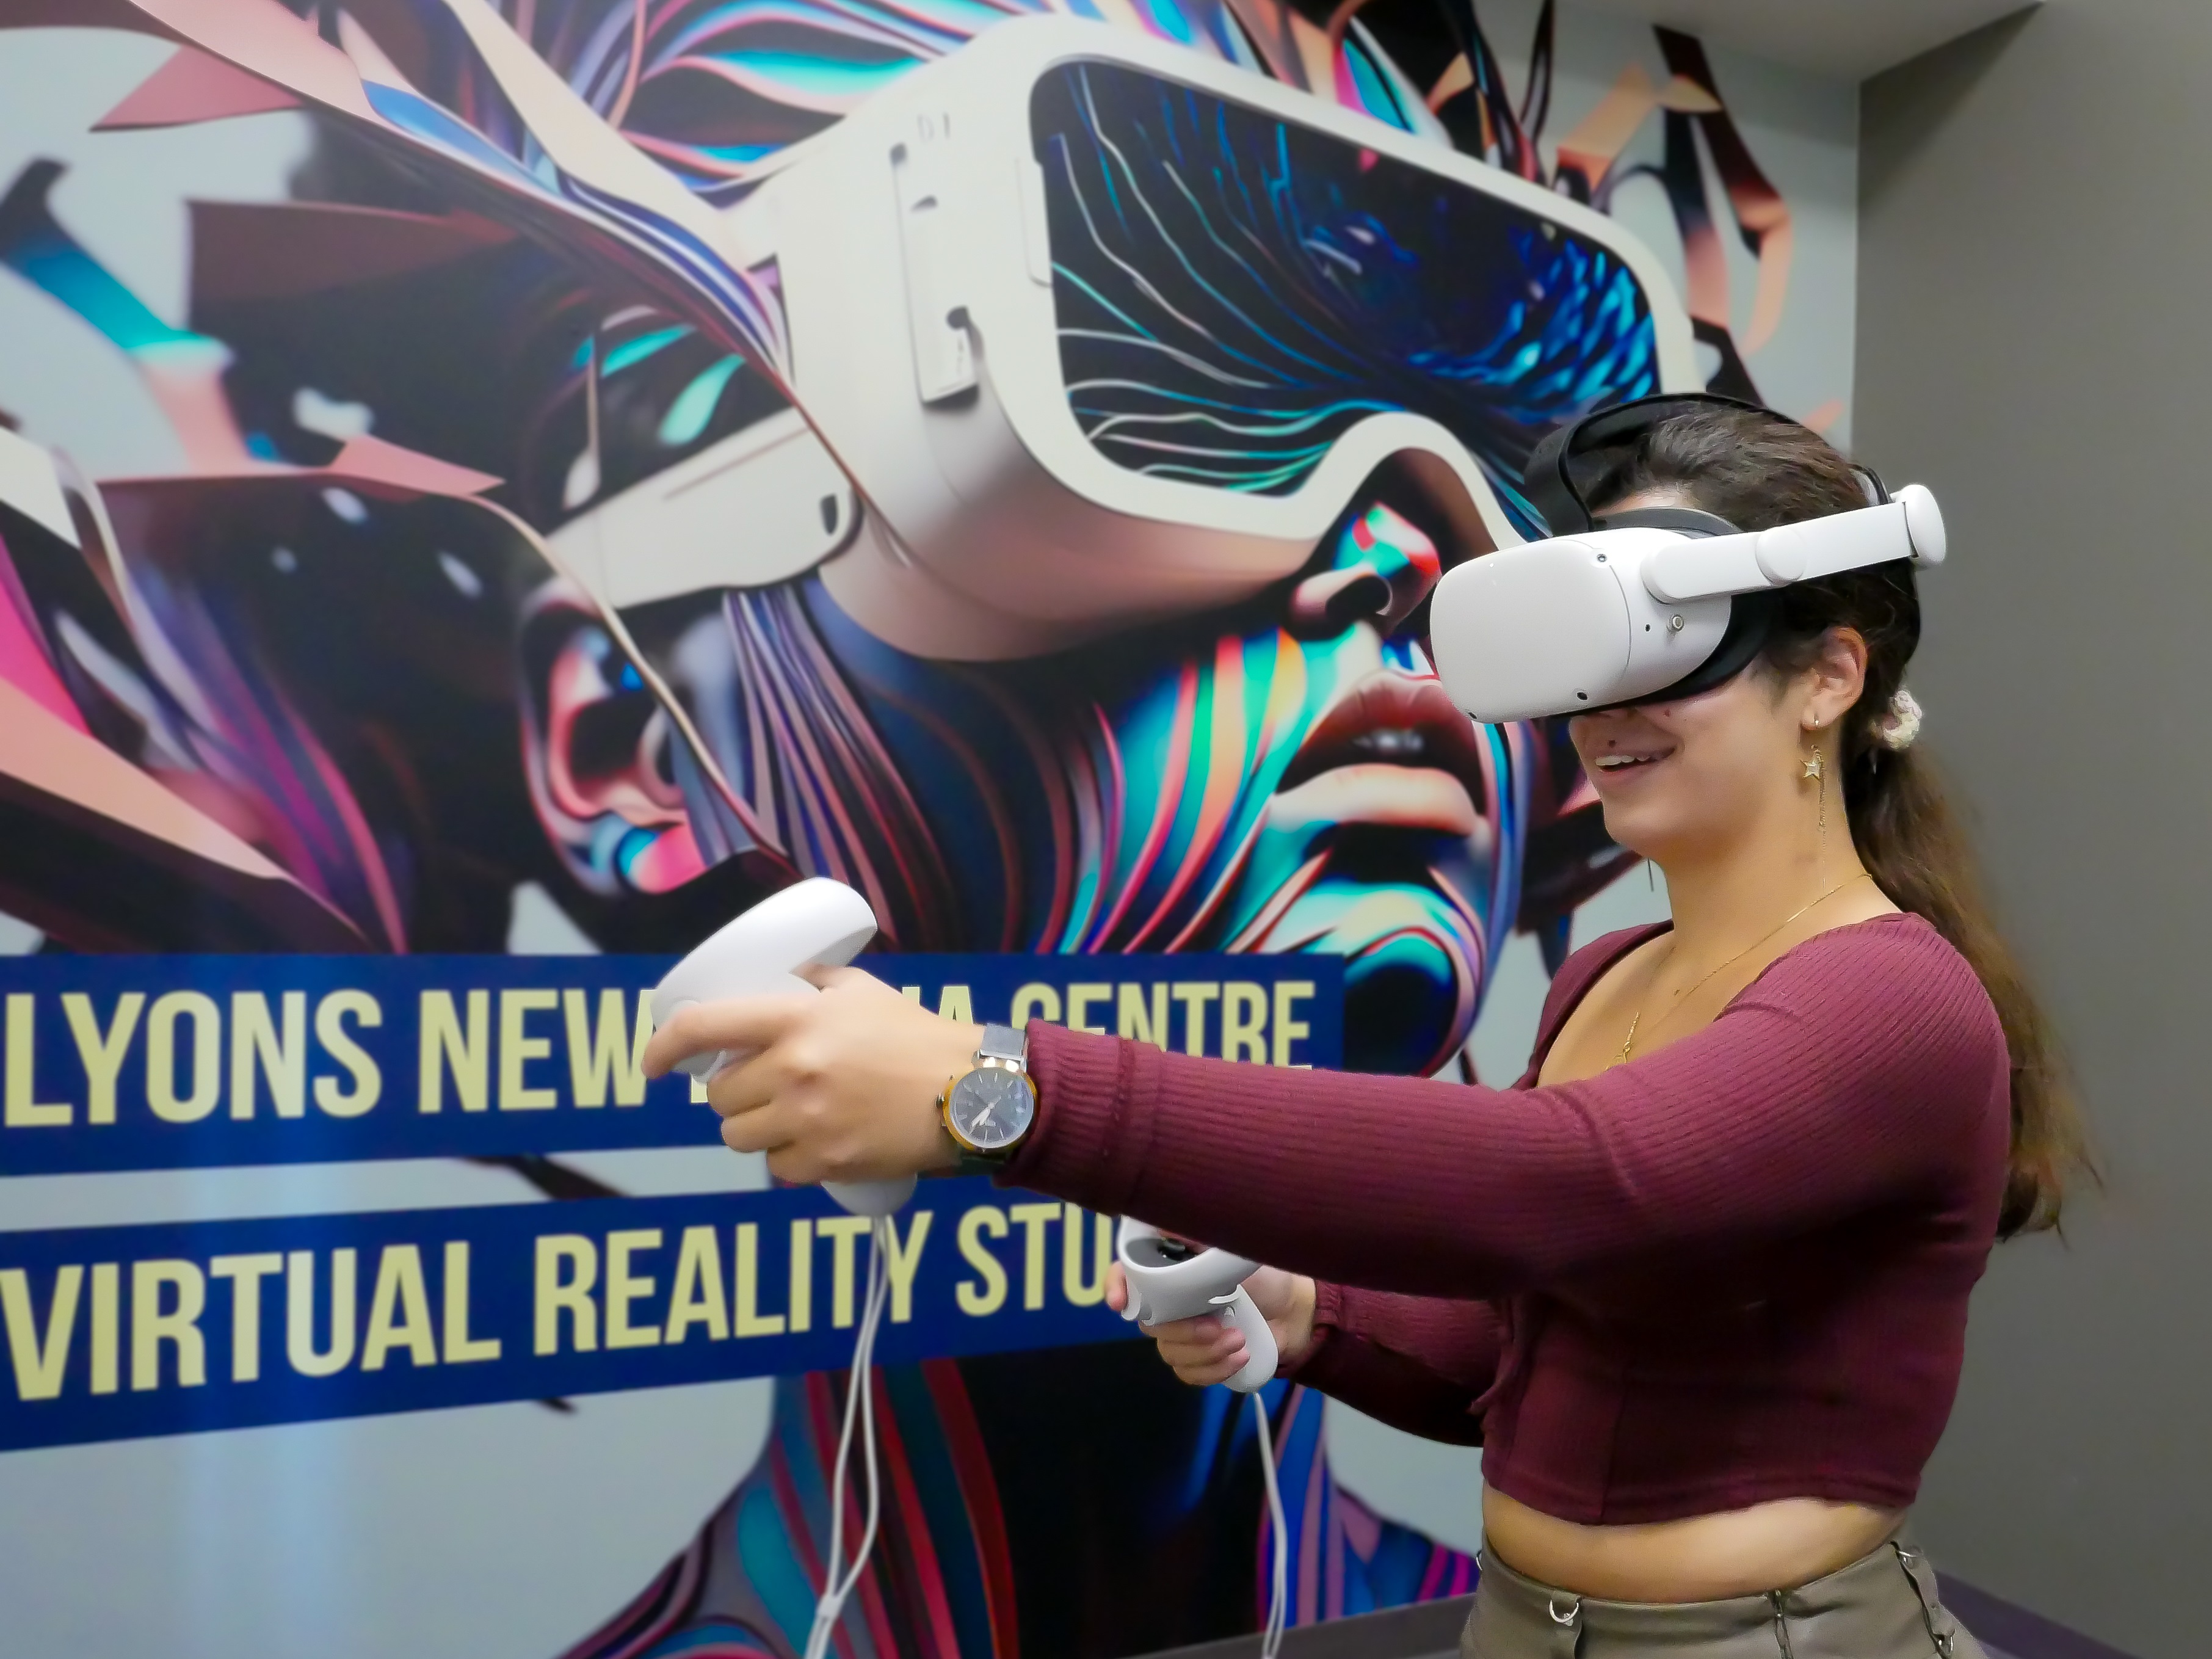 Veronica Larrazabal Zea, third year mechanical and biomedical engineering student, uses a Meta Quest headset and touch controllers in the virtual reality room at Lyons New Media Centre. 